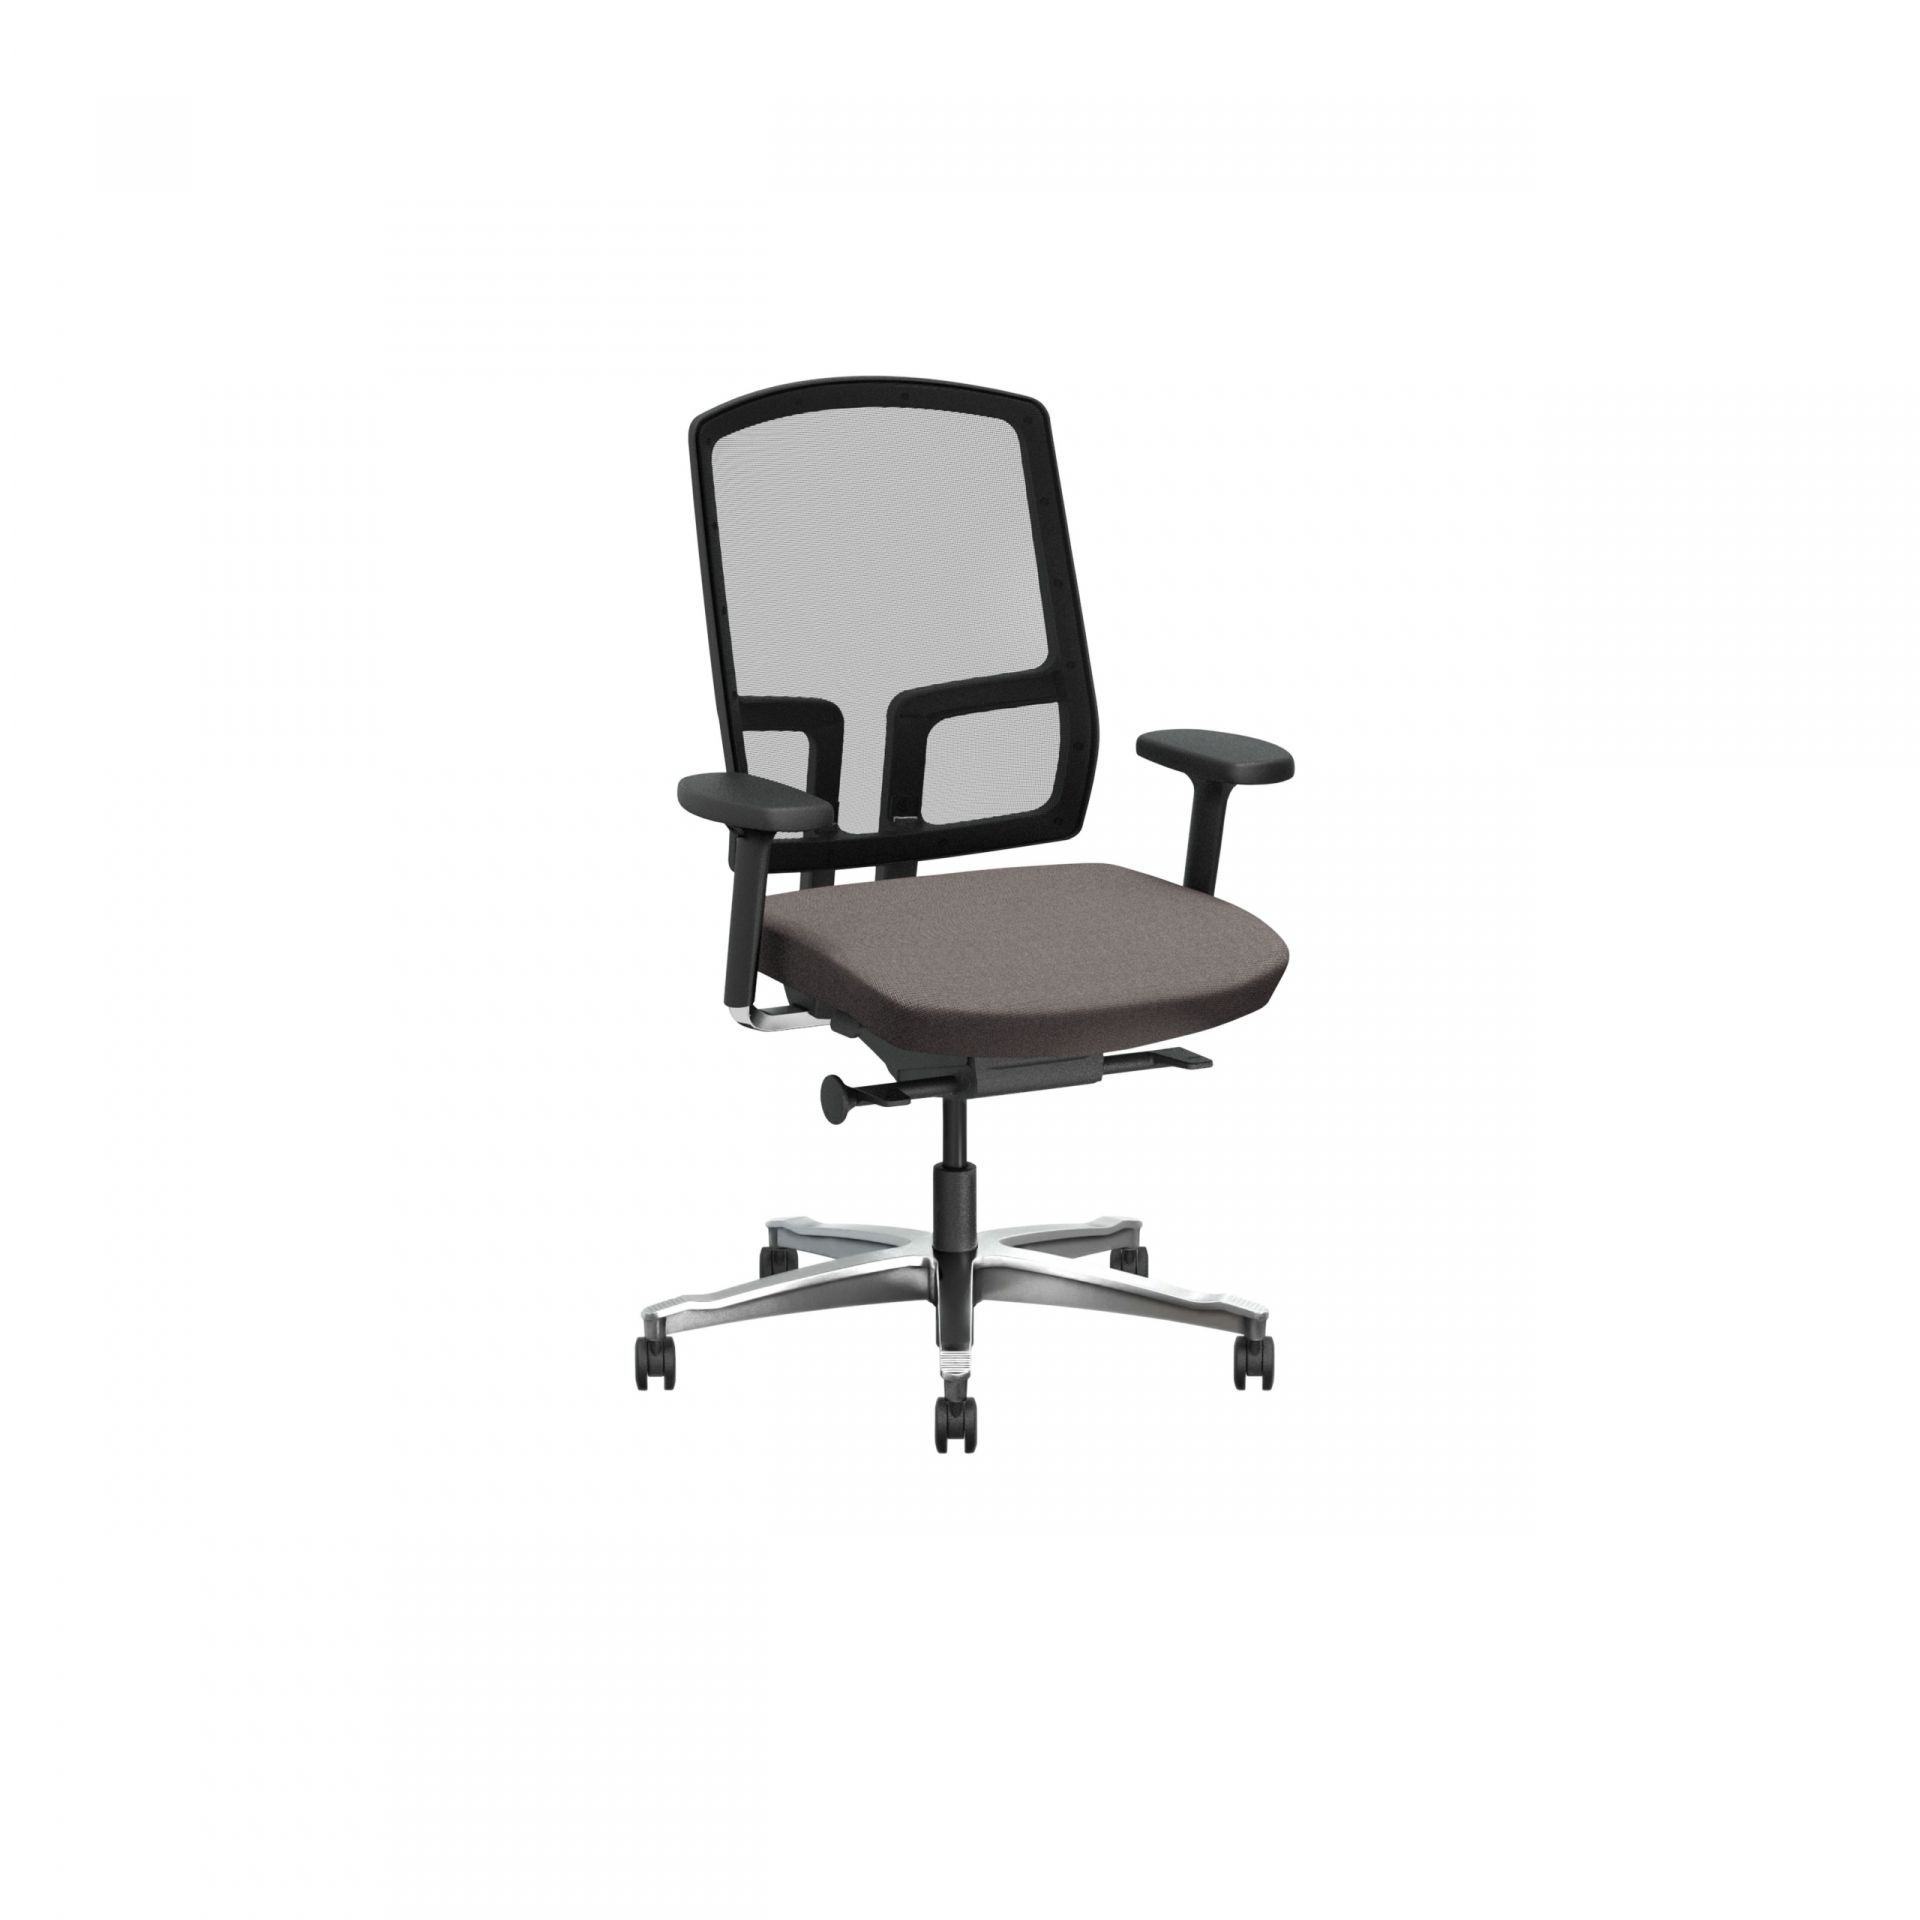 One Office chair with easy adjustments thumbnail image 3